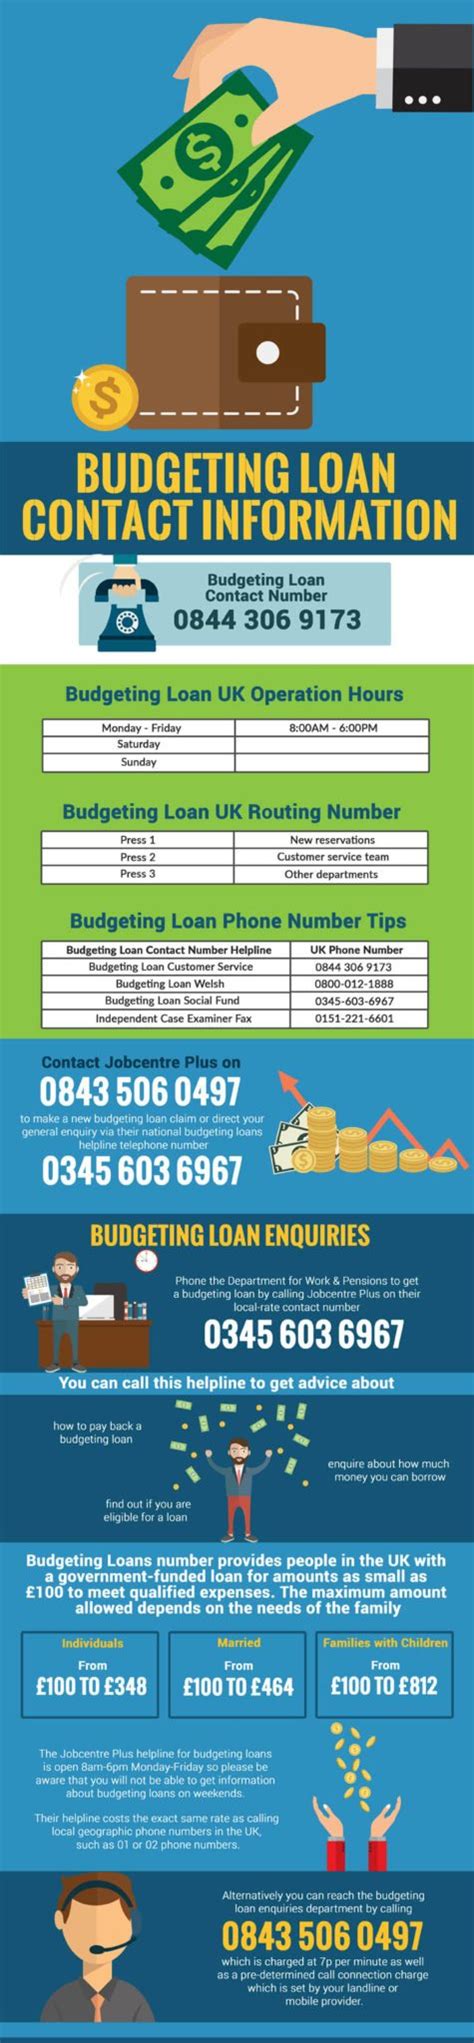 Term loan asb / asb2. Easy Budgeting Loan Phone Numbers - Direct Call on 0844 ...